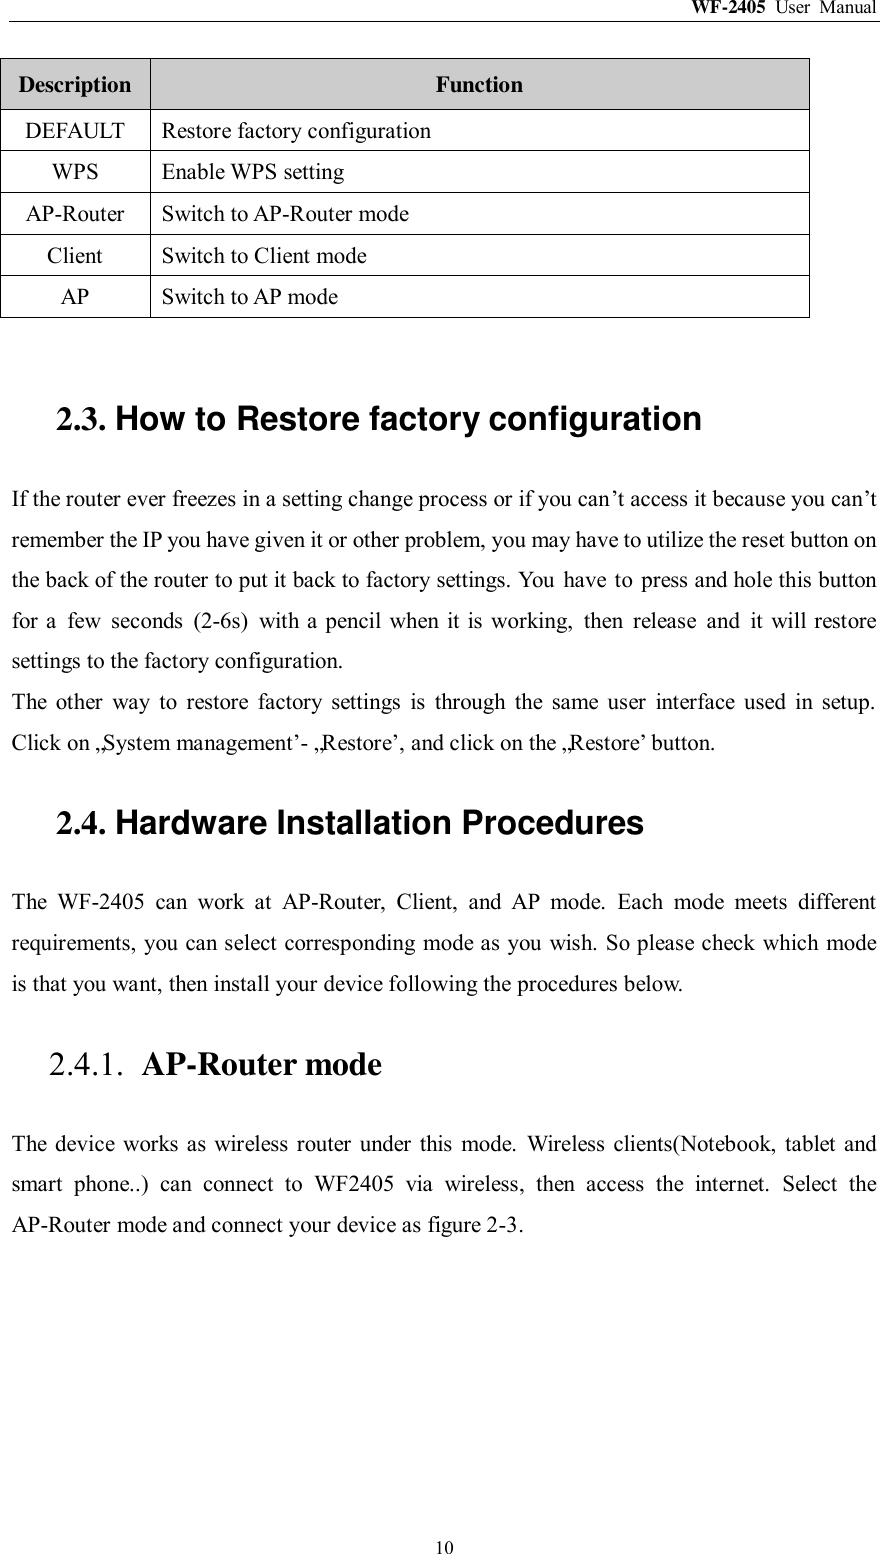 WF-2405  User  Manual  10 Description Function DEFAULT Restore factory configuration WPS Enable WPS setting AP-Router Switch to AP-Router mode Client Switch to Client mode AP Switch to AP mode  2.3. How to Restore factory configuration If the router ever freezes in a setting change process or if you can‟t access it because you can‟t remember the IP you have given it or other problem, you may have to utilize the reset button on the back of the router to put it back to factory settings. You  have  to  press and hole this button for  a  few  seconds  (2-6s)  with a  pencil when it is  working,  then  release  and  it  will restore settings to the factory configuration. The  other  way  to  restore  factory  settings  is  through  the  same  user  interface  used  in  setup. Click on „System management‟- „Restore‟, and click on the „Restore‟ button. 2.4. Hardware Installation Procedures The  WF-2405  can  work  at  AP-Router,  Client,  and  AP  mode.  Each  mode  meets  different requirements, you can select corresponding mode as you wish. So please check which mode is that you want, then install your device following the procedures below. 2.4.1. AP-Router mode The  device  works  as wireless router  under  this  mode. Wireless  clients(Notebook, tablet  and smart  phone..)  can  connect  to  WF2405  via  wireless,  then  access  the  internet.  Select  the AP-Router mode and connect your device as figure 2-3. 